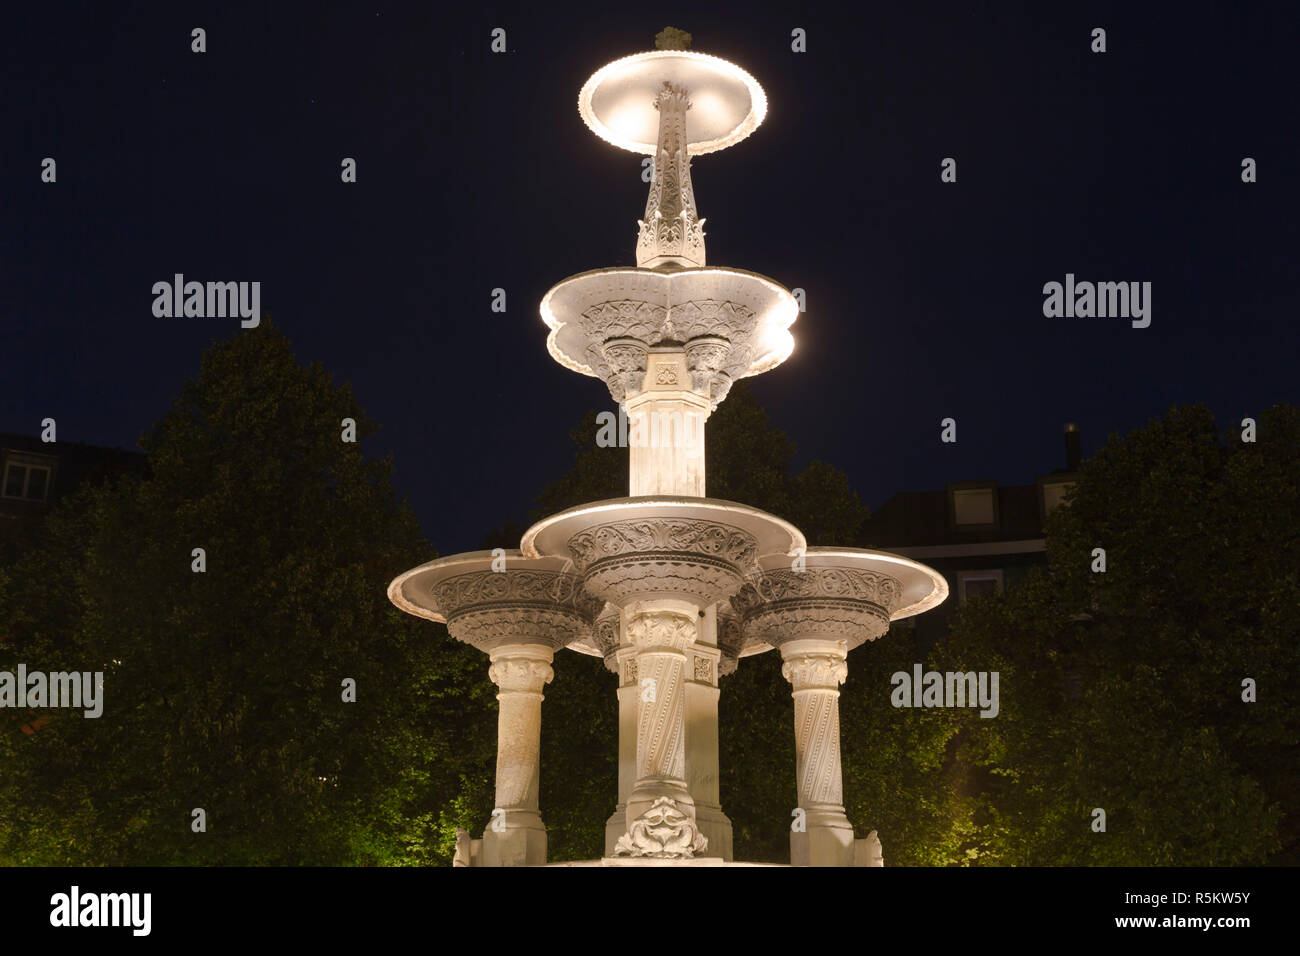 the glass palace fountain in munich at night Stock Photo